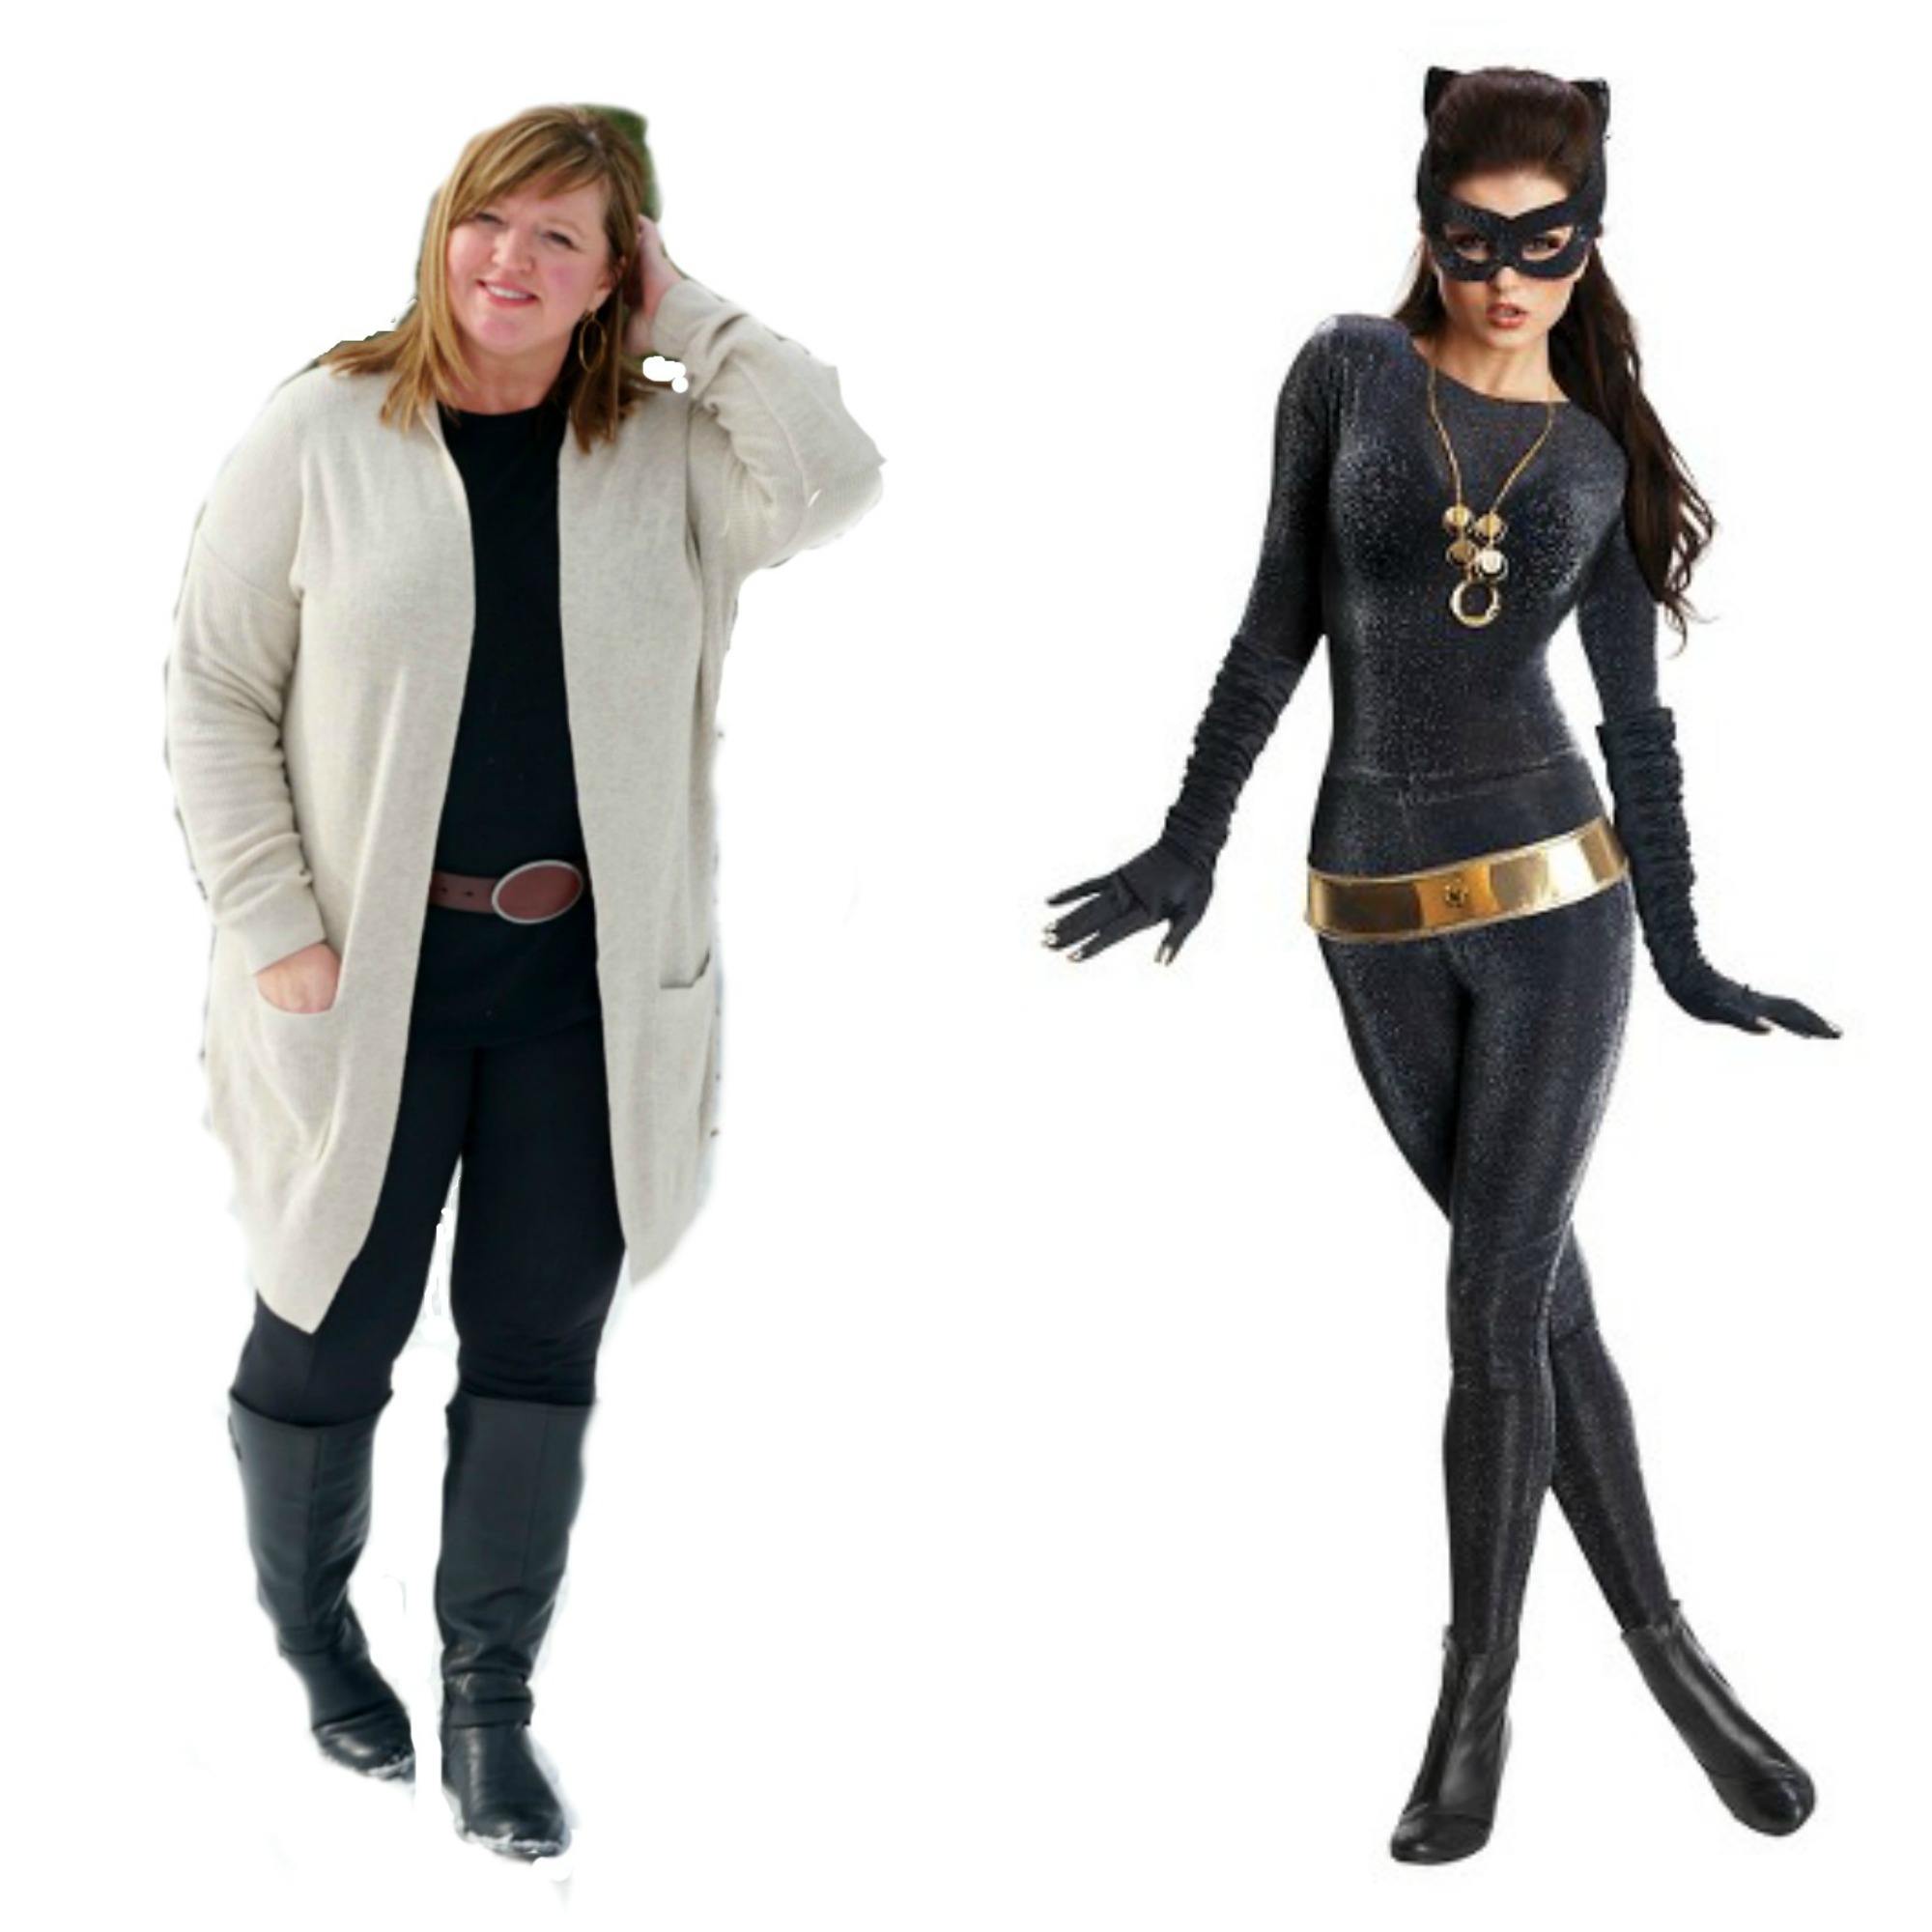 Cat Woman Inspired Style | Fictional Fashion in the Real World | Plus Size Fashion | Fashion for Women Over 50